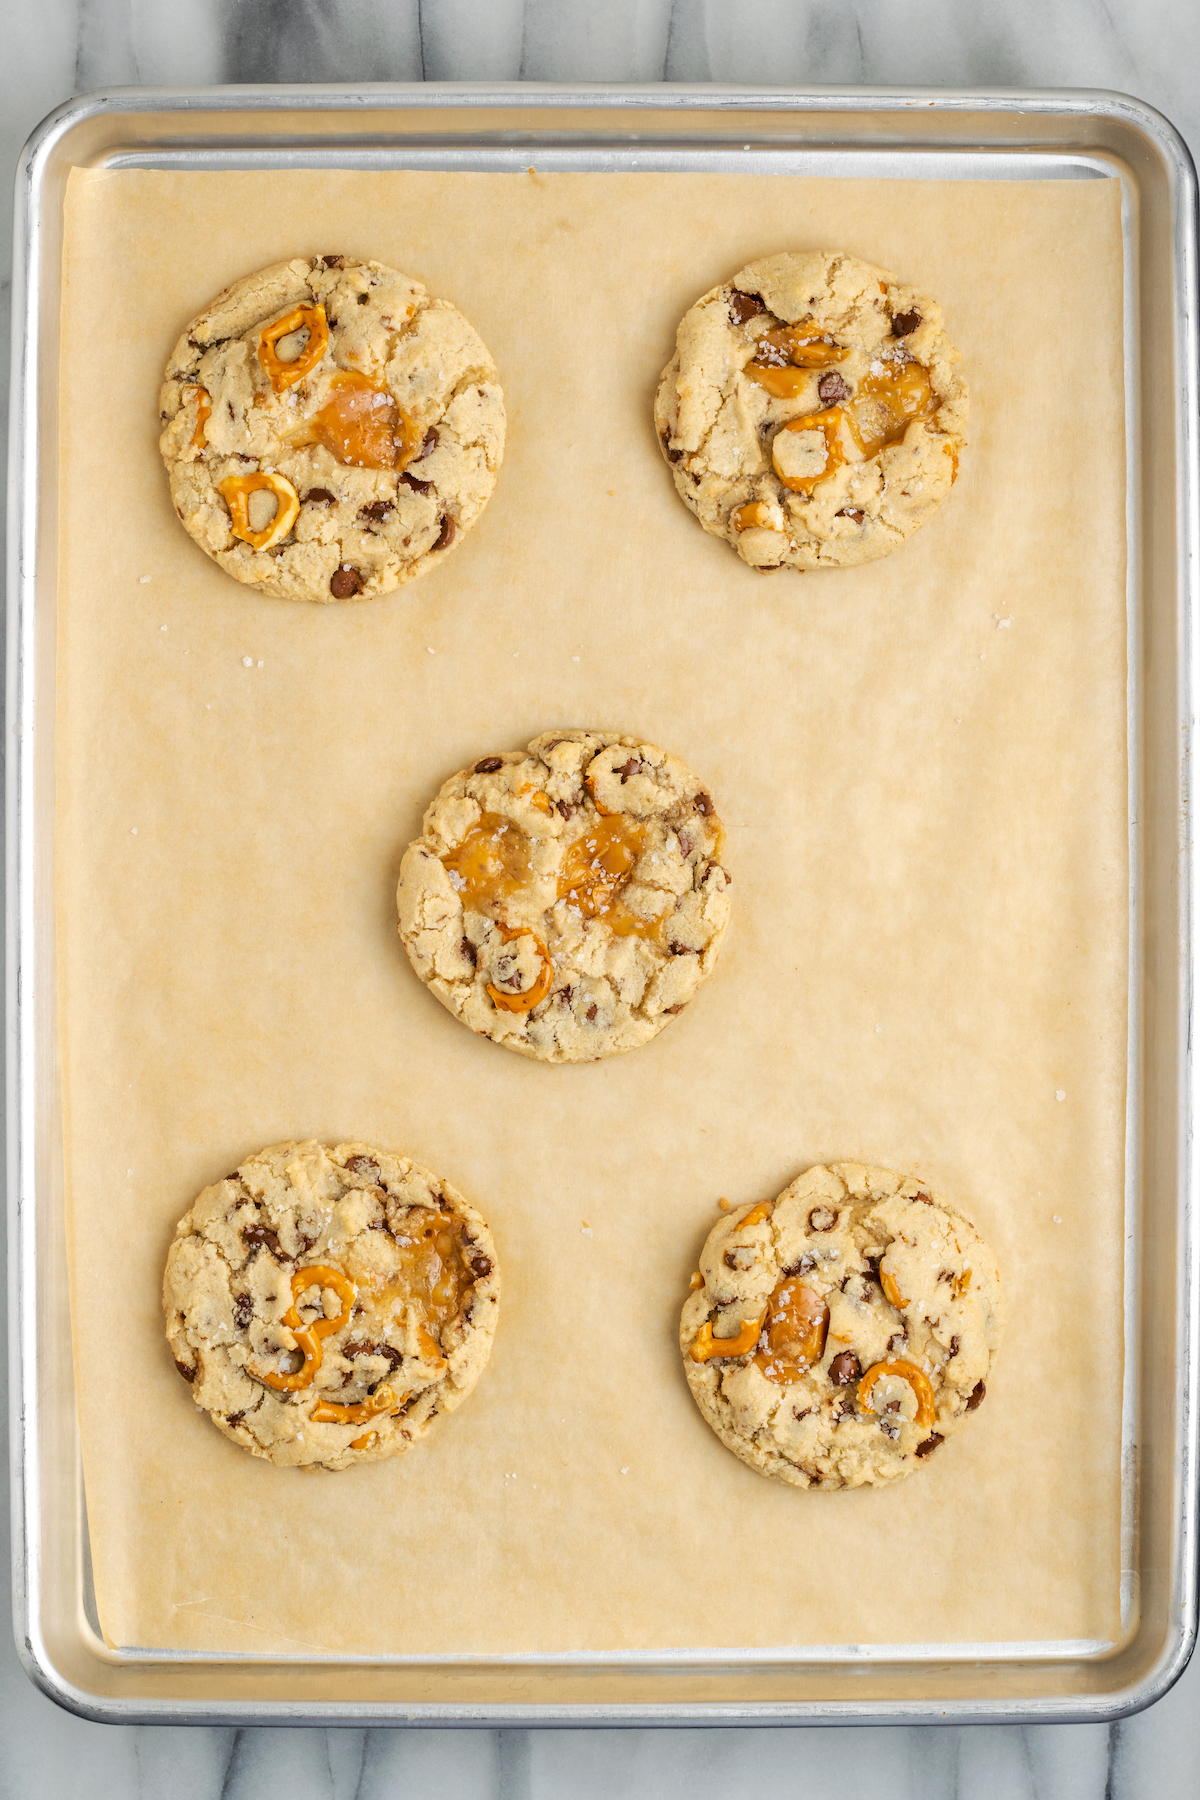 Overhead view of 5 kitchen sink cookies on parchment-lined baking sheet